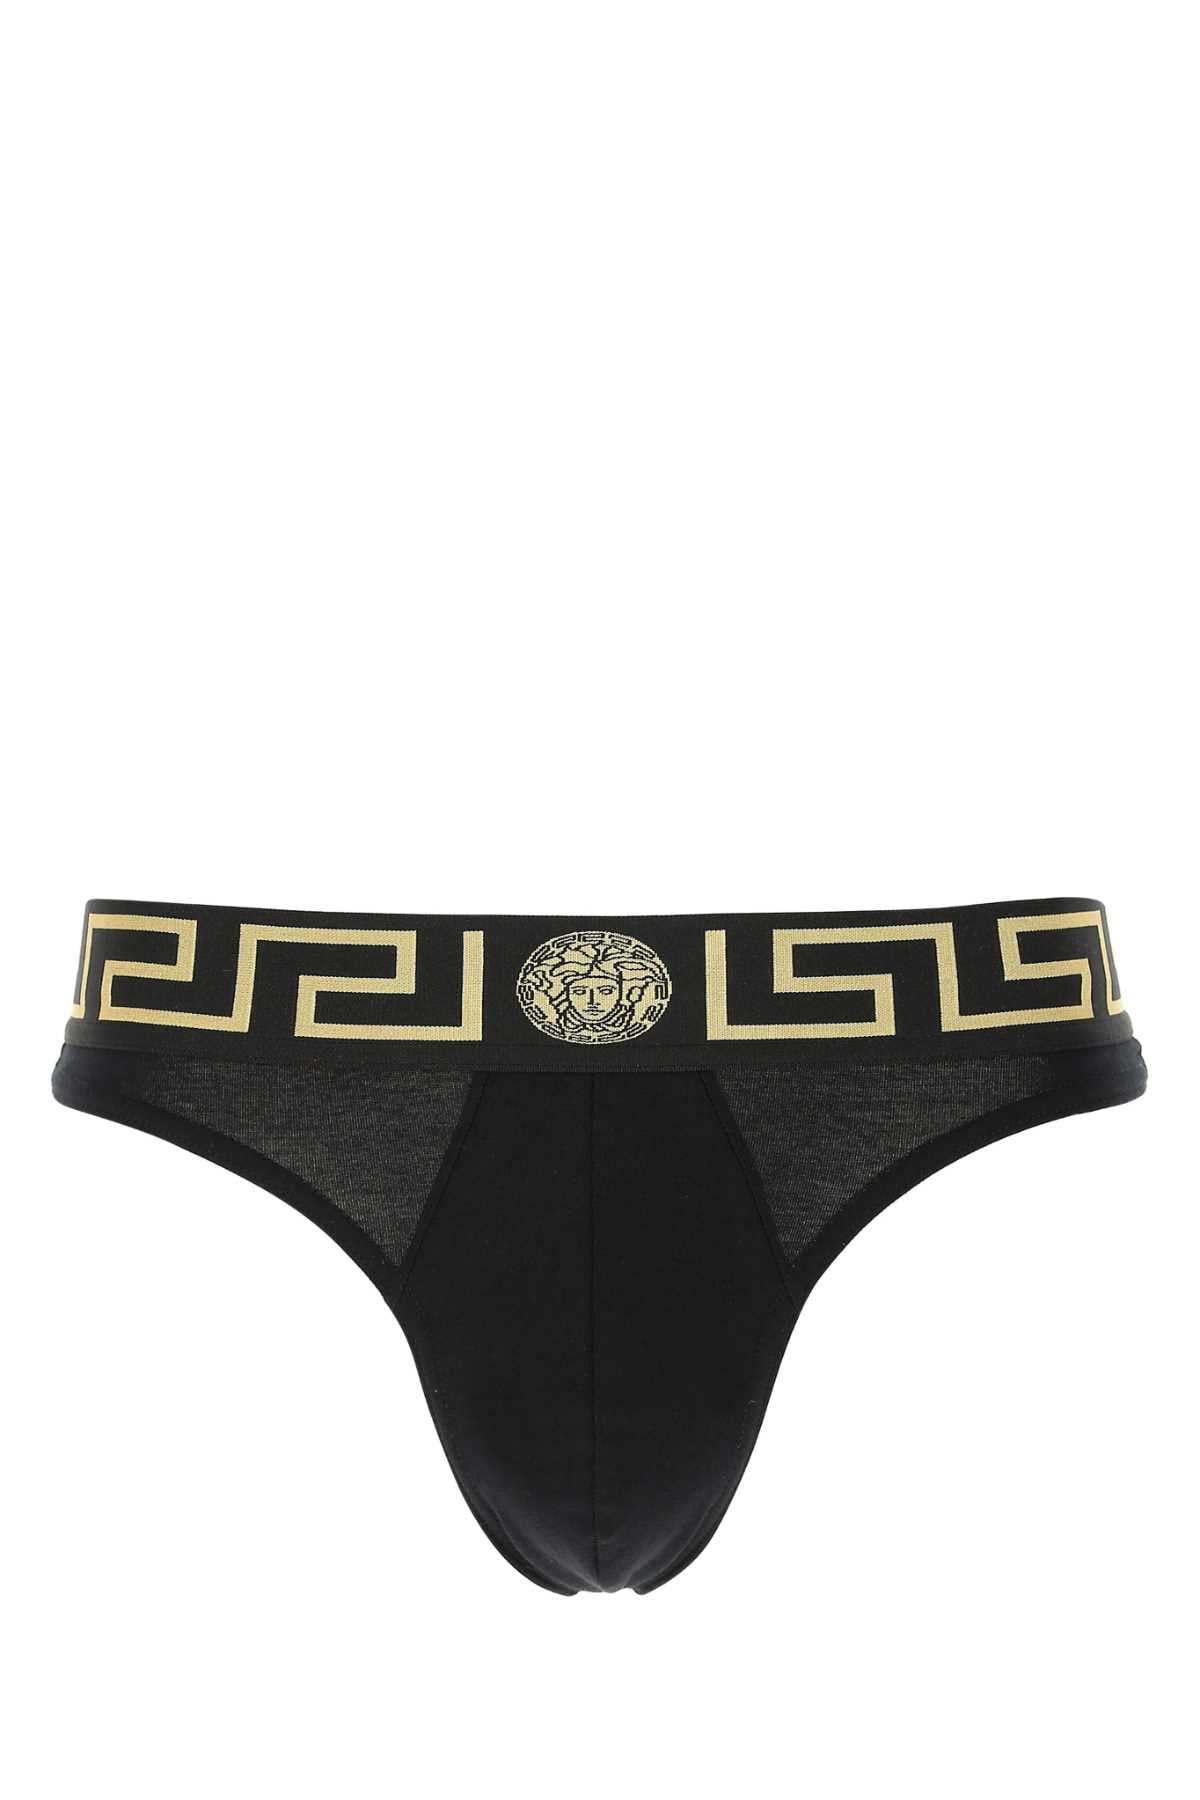 VERSACE MENS THONG?!!! REVIEW AND BOXER COMPARISON!!! 